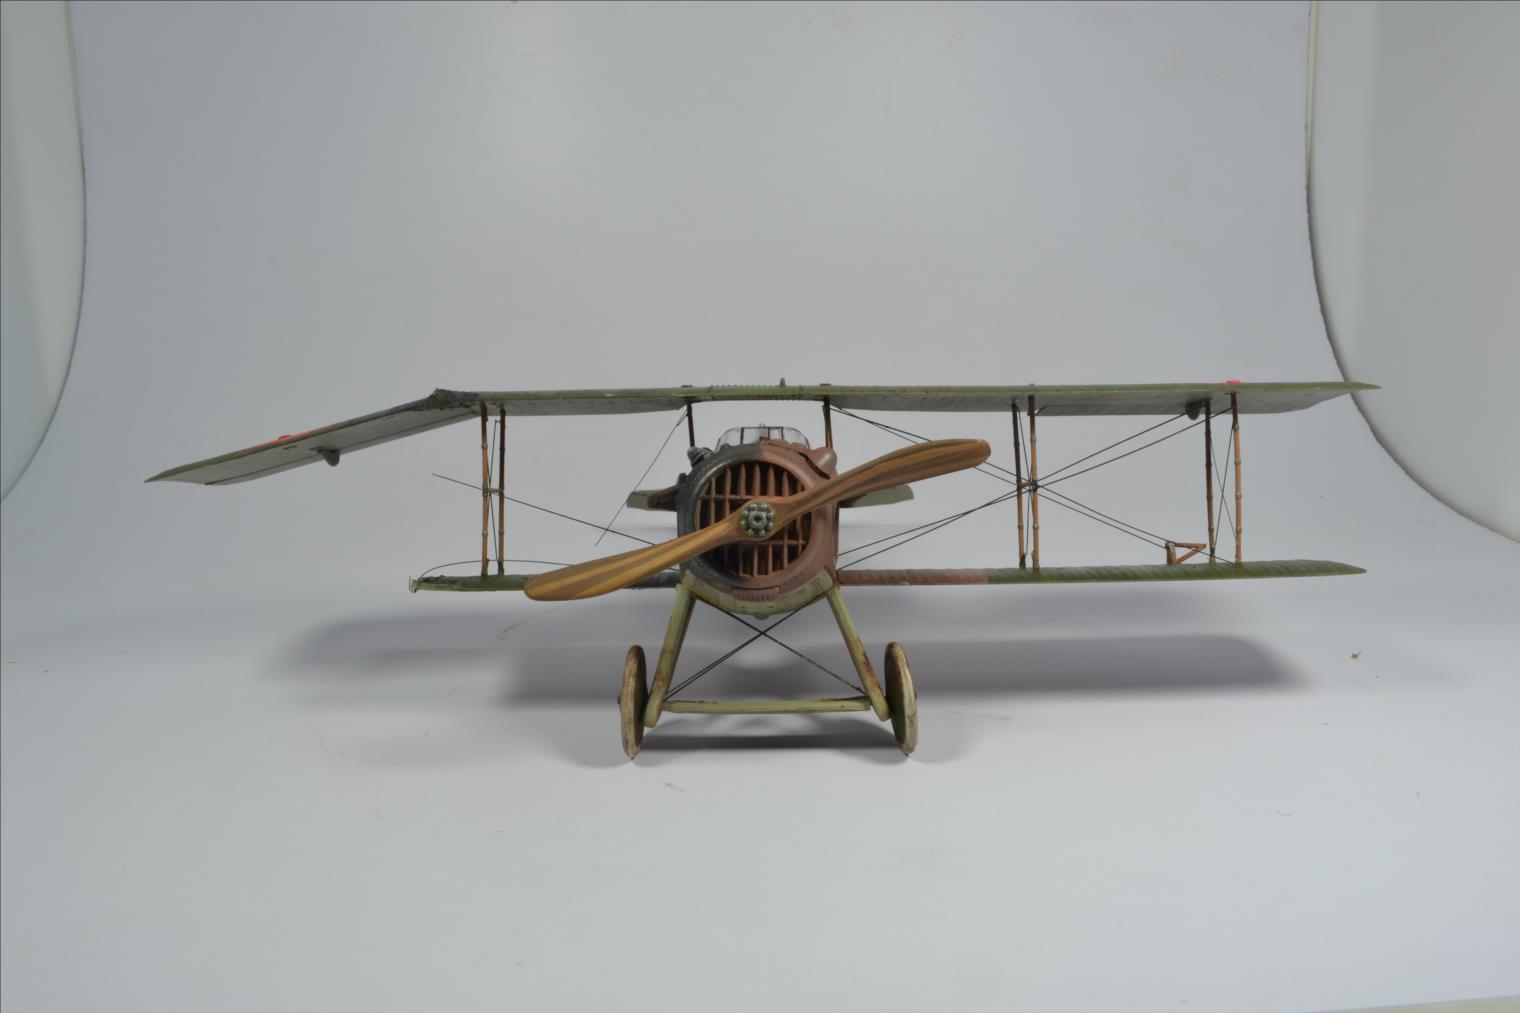 SPAD VIIc1 (RODEN 1/32) - Page 4 21032307592322494217331230